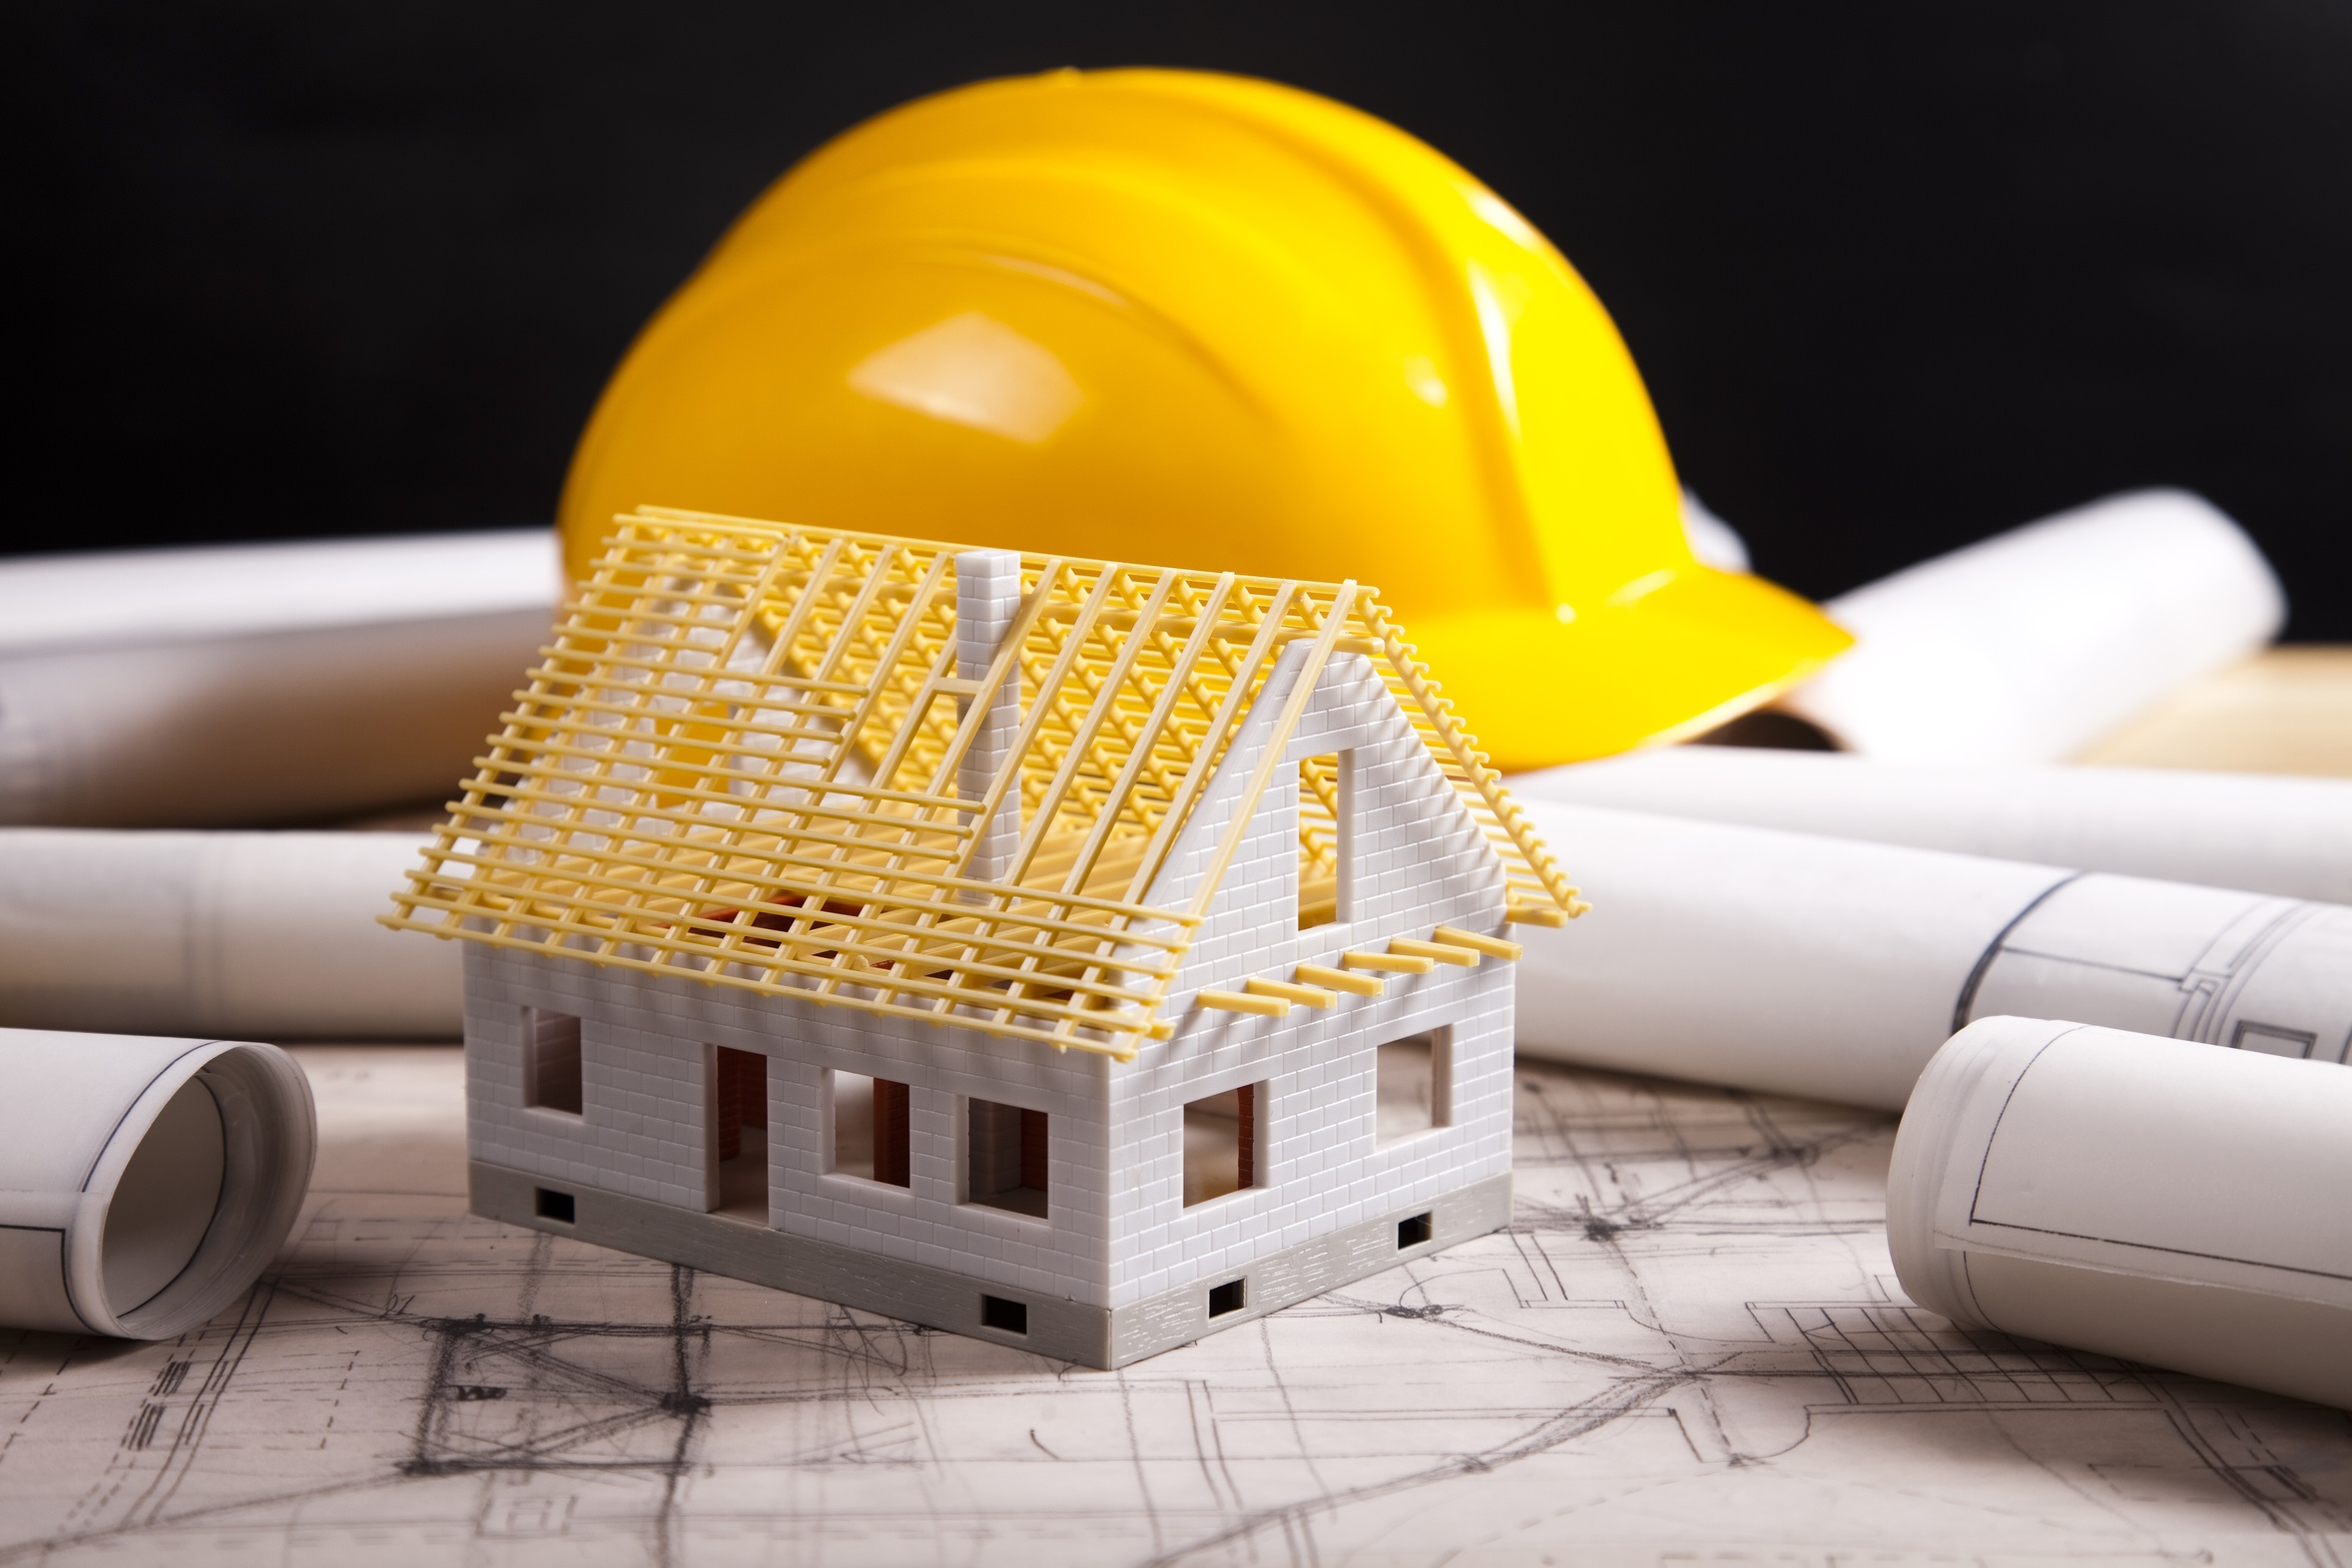 Cases of house construction do not require a building permit in Vietnam